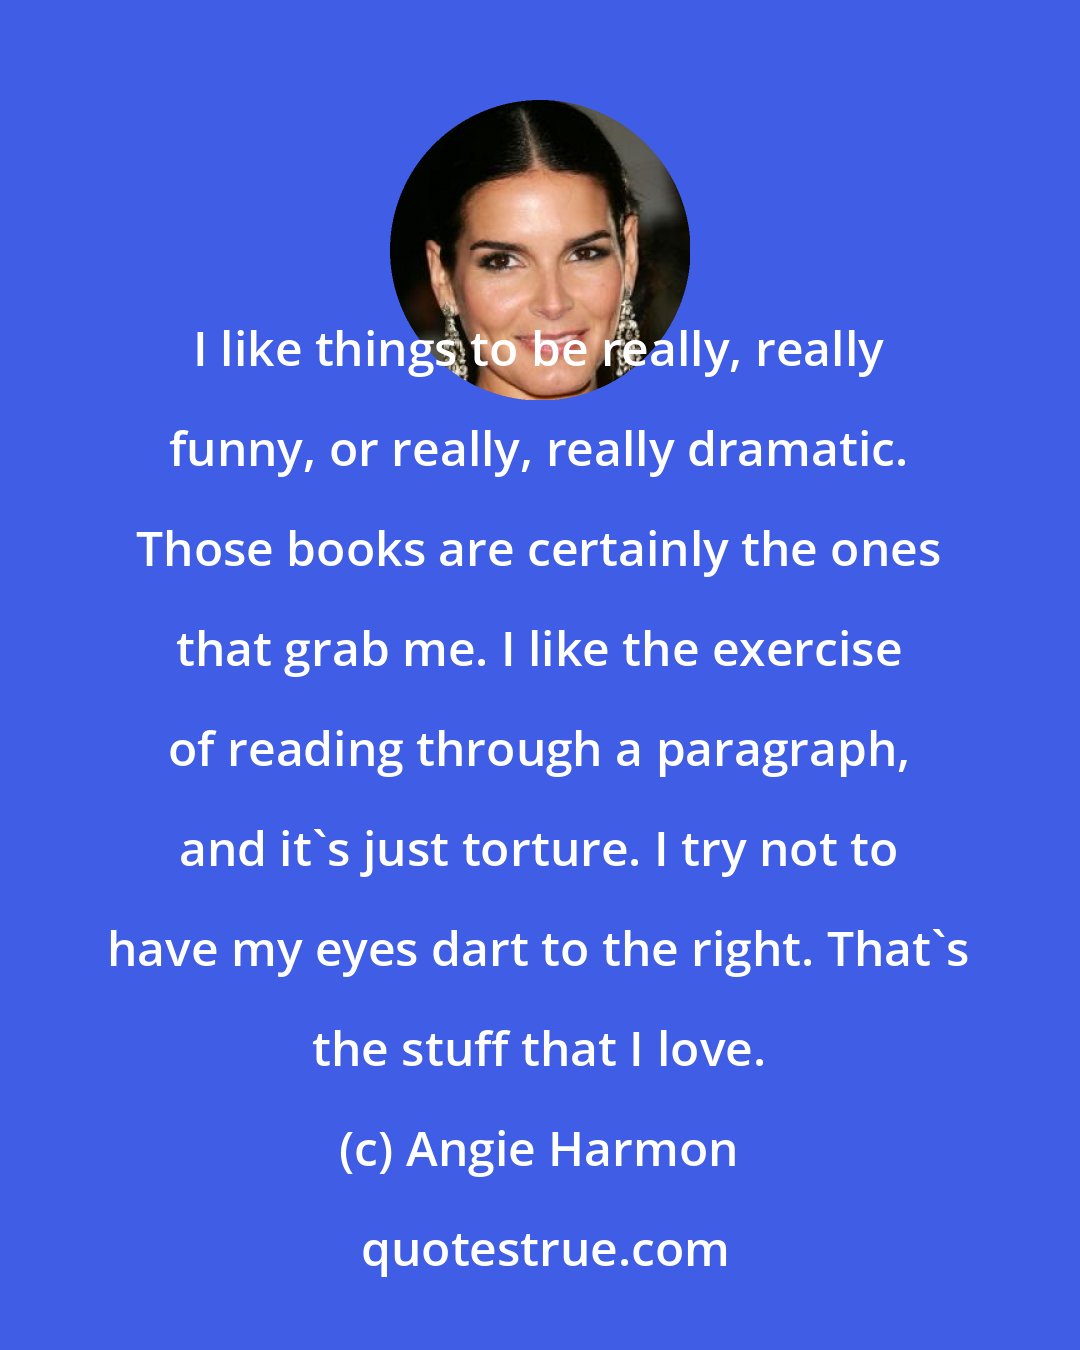 Angie Harmon: I like things to be really, really funny, or really, really dramatic. Those books are certainly the ones that grab me. I like the exercise of reading through a paragraph, and it's just torture. I try not to have my eyes dart to the right. That's the stuff that I love.